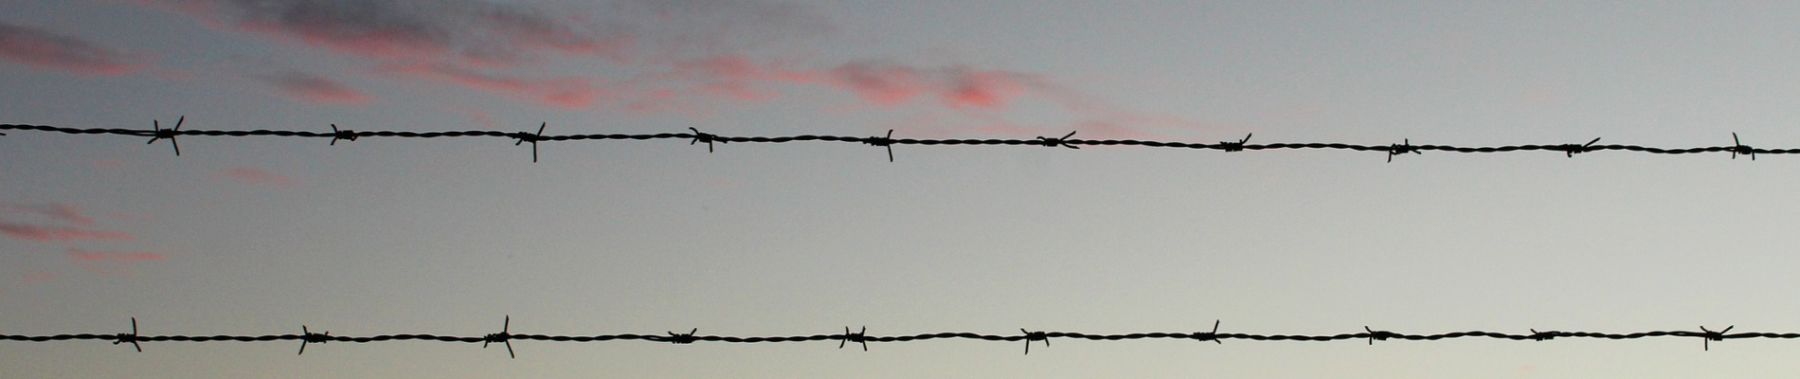 Shine Lawyers | Barbed wire at dusk | Strip search abuse | Shine Lawyers